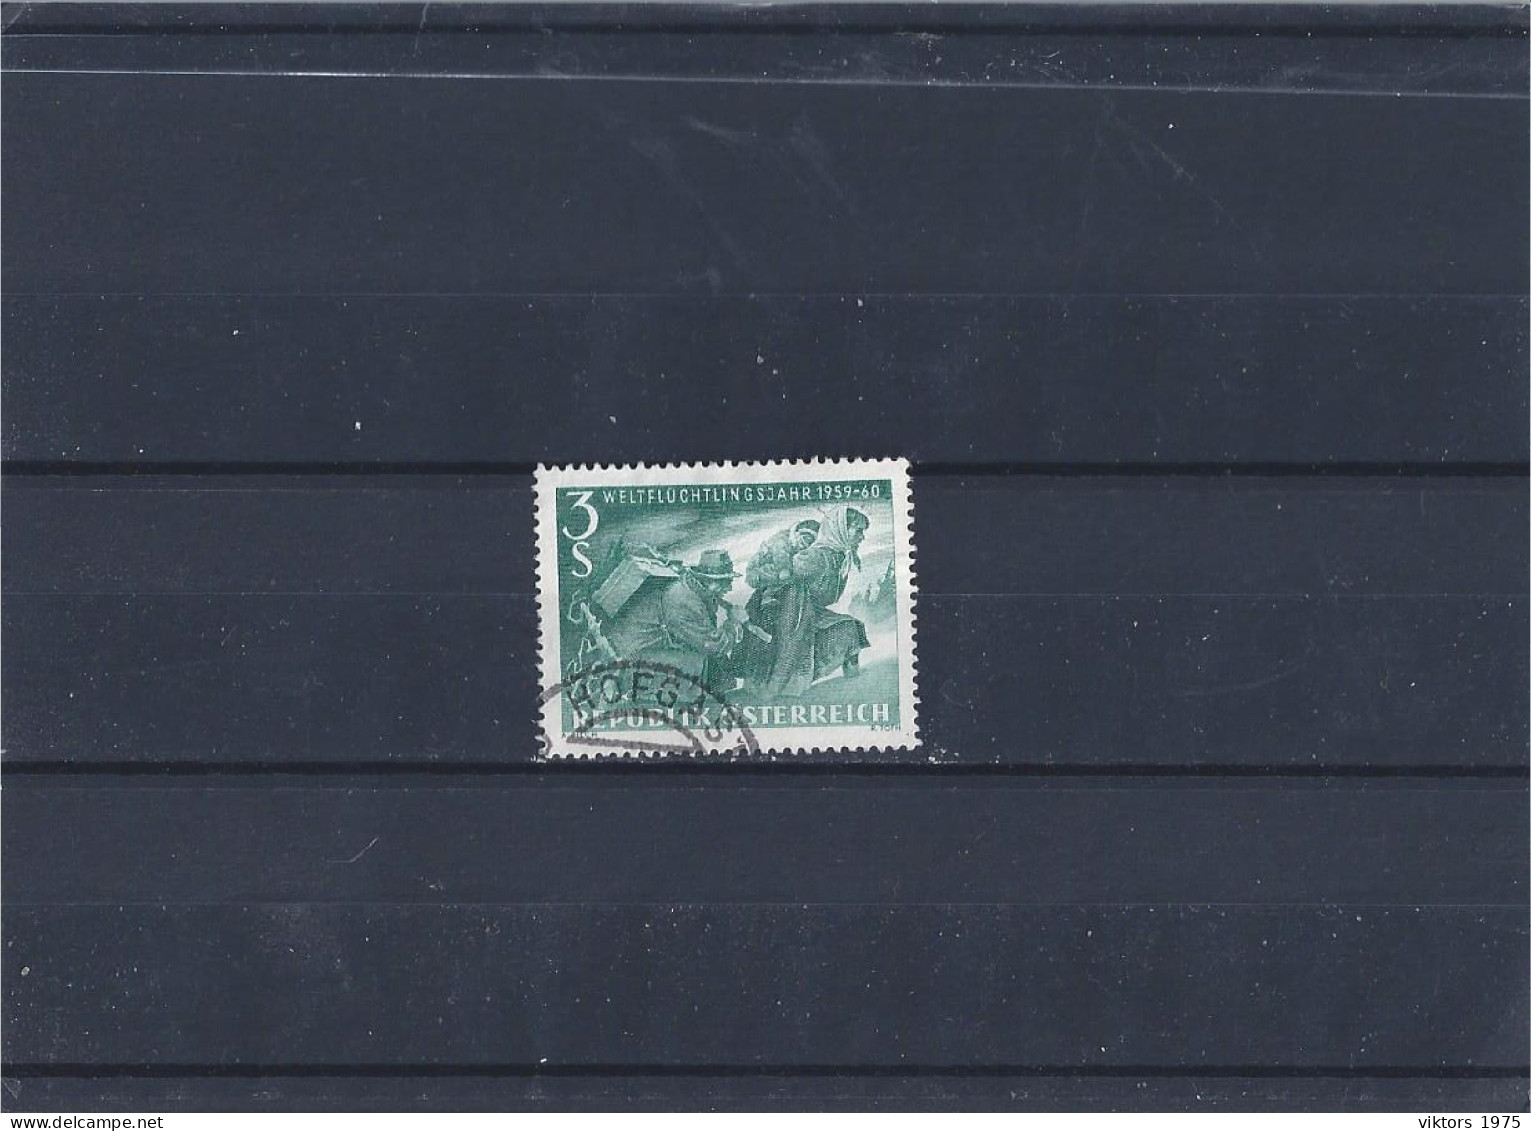 Used Stamp Nr.1074 In MICHEL Catalog - Used Stamps